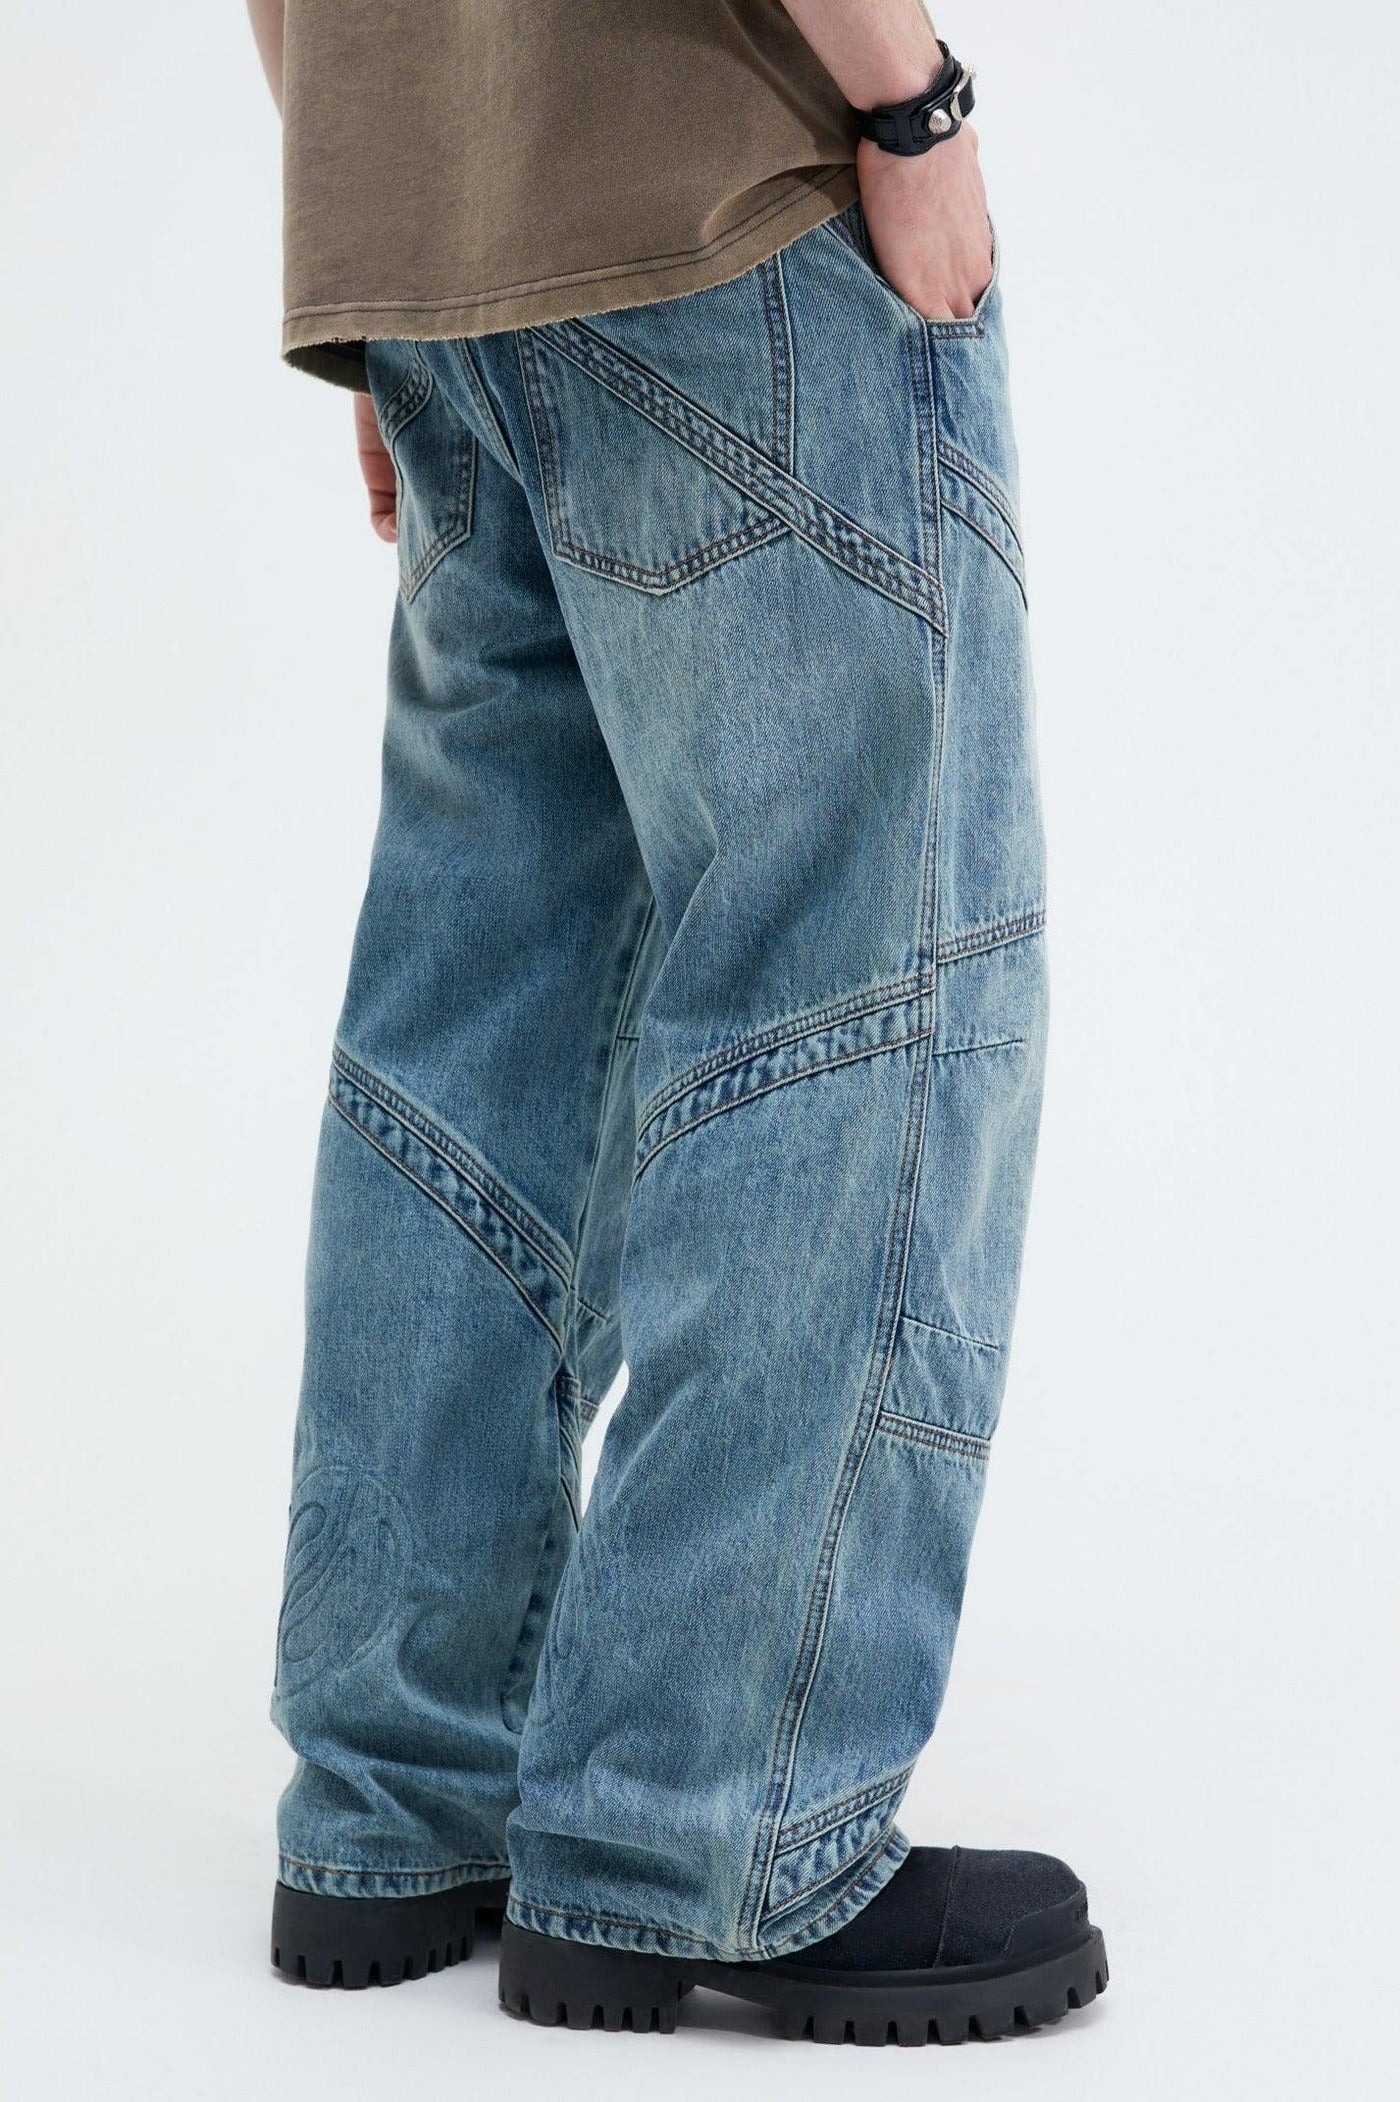 Bleach Washed Jeans Korean Street Fashion Jeans By R69 Shop Online at OH Vault